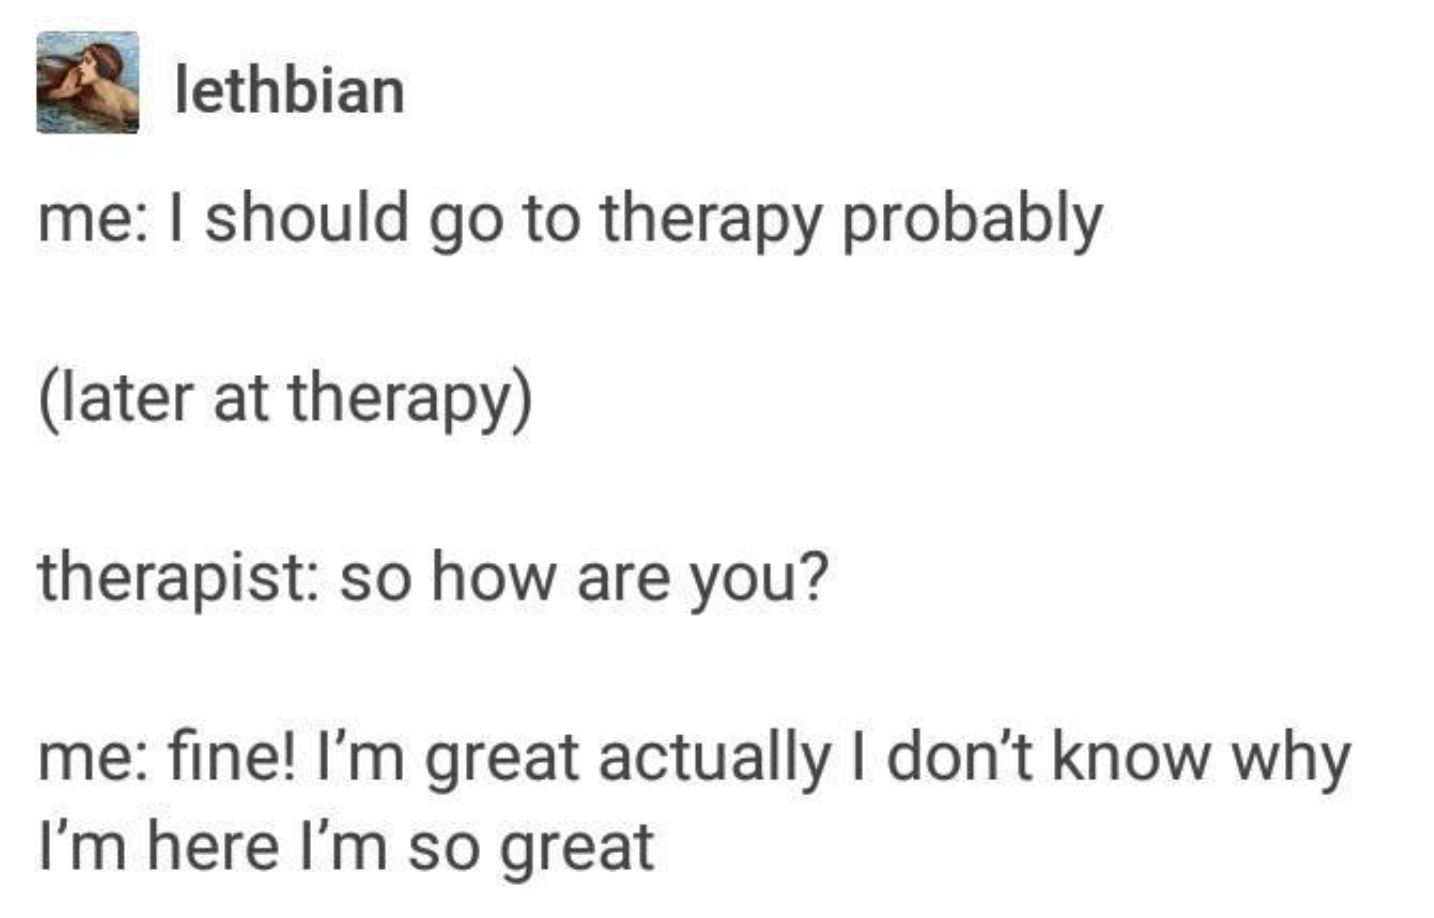 Me: &quot;I should go to therapy probably&quot; (later at therapy) therapist: &quot;so how are you?&quot; Me: &quot;fine! I’m great actually I don’t know why I’m here I’m so great&quot;